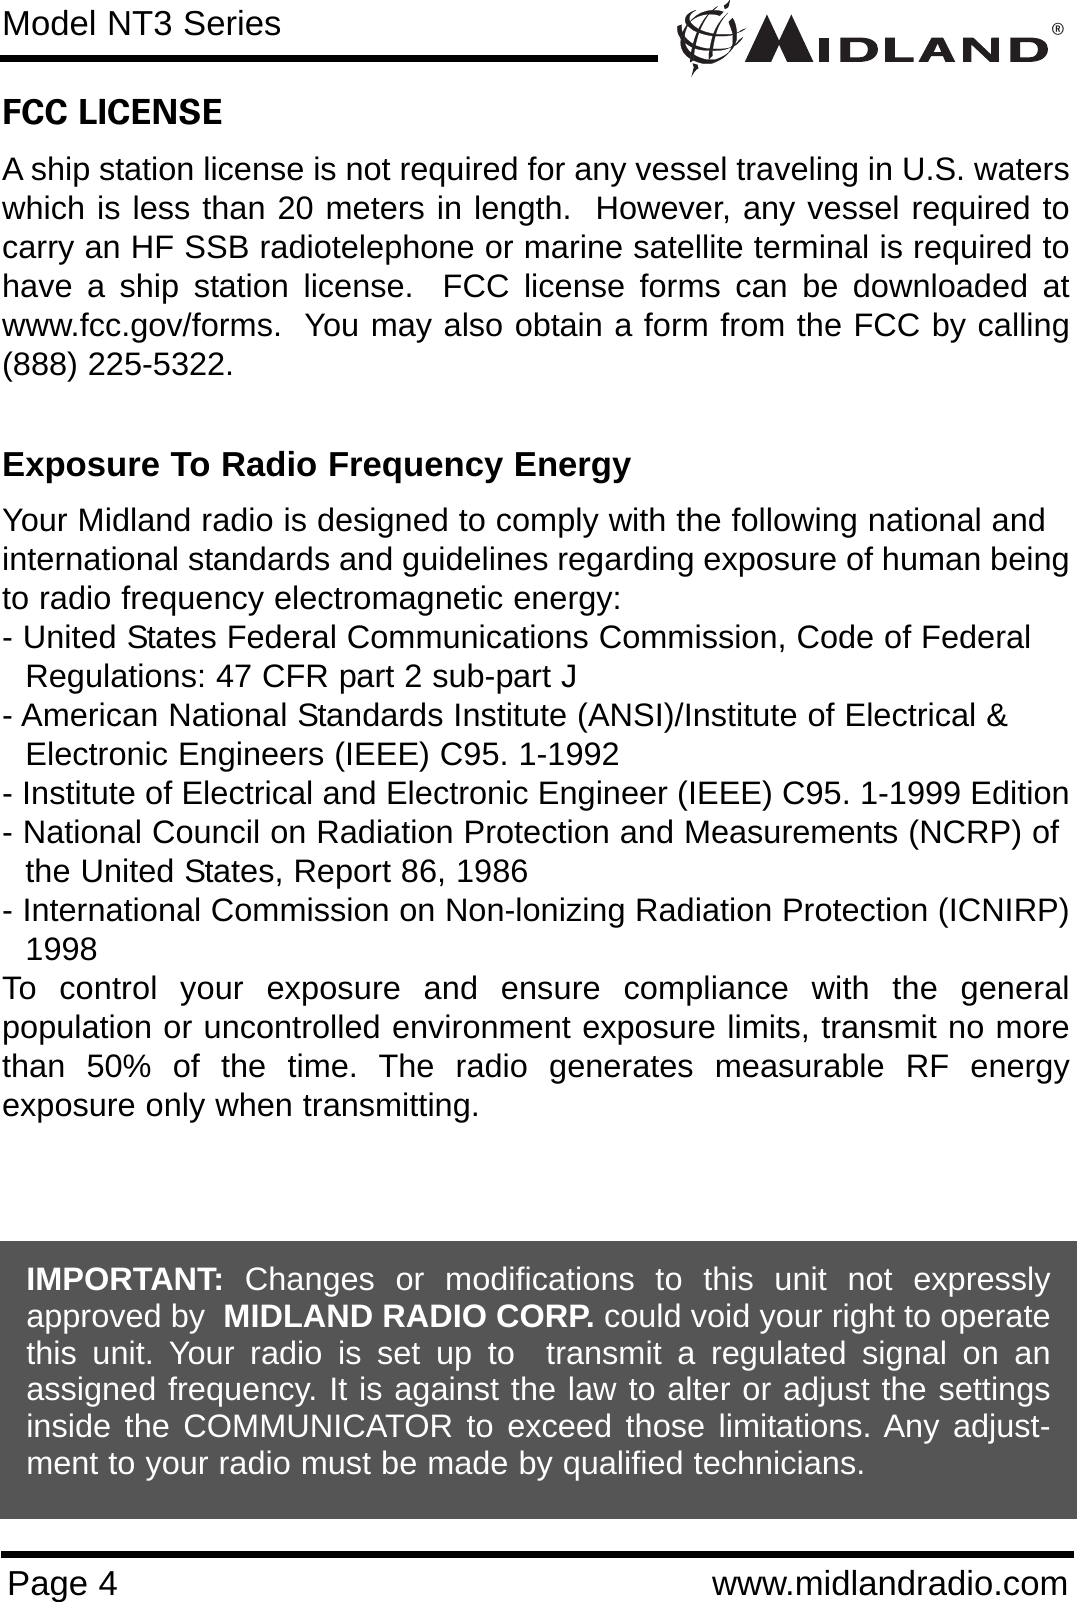 ®Page 4 www.midlandradio.comFCC LICENSEA ship station license is not required for any vessel traveling in U.S. waterswhich is less than 20 meters in length.  However, any vessel required tocarry an HF SSB radiotelephone or marine satellite terminal is required tohave a ship station license.  FCC license forms can be downloaded atwww.fcc.gov/forms.  You may also obtain a form from the FCC by calling(888) 225-5322.Exposure To Radio Frequency EnergyYour Midland radio is designed to comply with the following national and international standards and guidelines regarding exposure of human beingto radio frequency electromagnetic energy:- United States Federal Communications Commission, Code of Federal Regulations: 47 CFR part 2 sub-part J- American National Standards Institute (ANSI)/Institute of Electrical &amp; Electronic Engineers (IEEE) C95. 1-1992- Institute of Electrical and Electronic Engineer (IEEE) C95. 1-1999 Edition- National Council on Radiation Protection and Measurements (NCRP) of the United States, Report 86, 1986- International Commission on Non-lonizing Radiation Protection (ICNIRP)1998To control your exposure and ensure compliance with the generalpopulation or uncontrolled environment exposure limits, transmit no morethan 50% of the time. The radio generates measurable RF energyexposure only when transmitting.Model NT3 SeriesIMPORTANT: Changes or modifications to this unit not expresslyapproved by  MIDLAND RADIO CORP. could void your right to operatethis unit. Your radio is set up to  transmit a regulated signal on anassigned frequency. It is against the law to alter or adjust the settingsinside the COMMUNICATOR to exceed those limitations. Any adjust-ment to your radio must be made by qualified technicians.